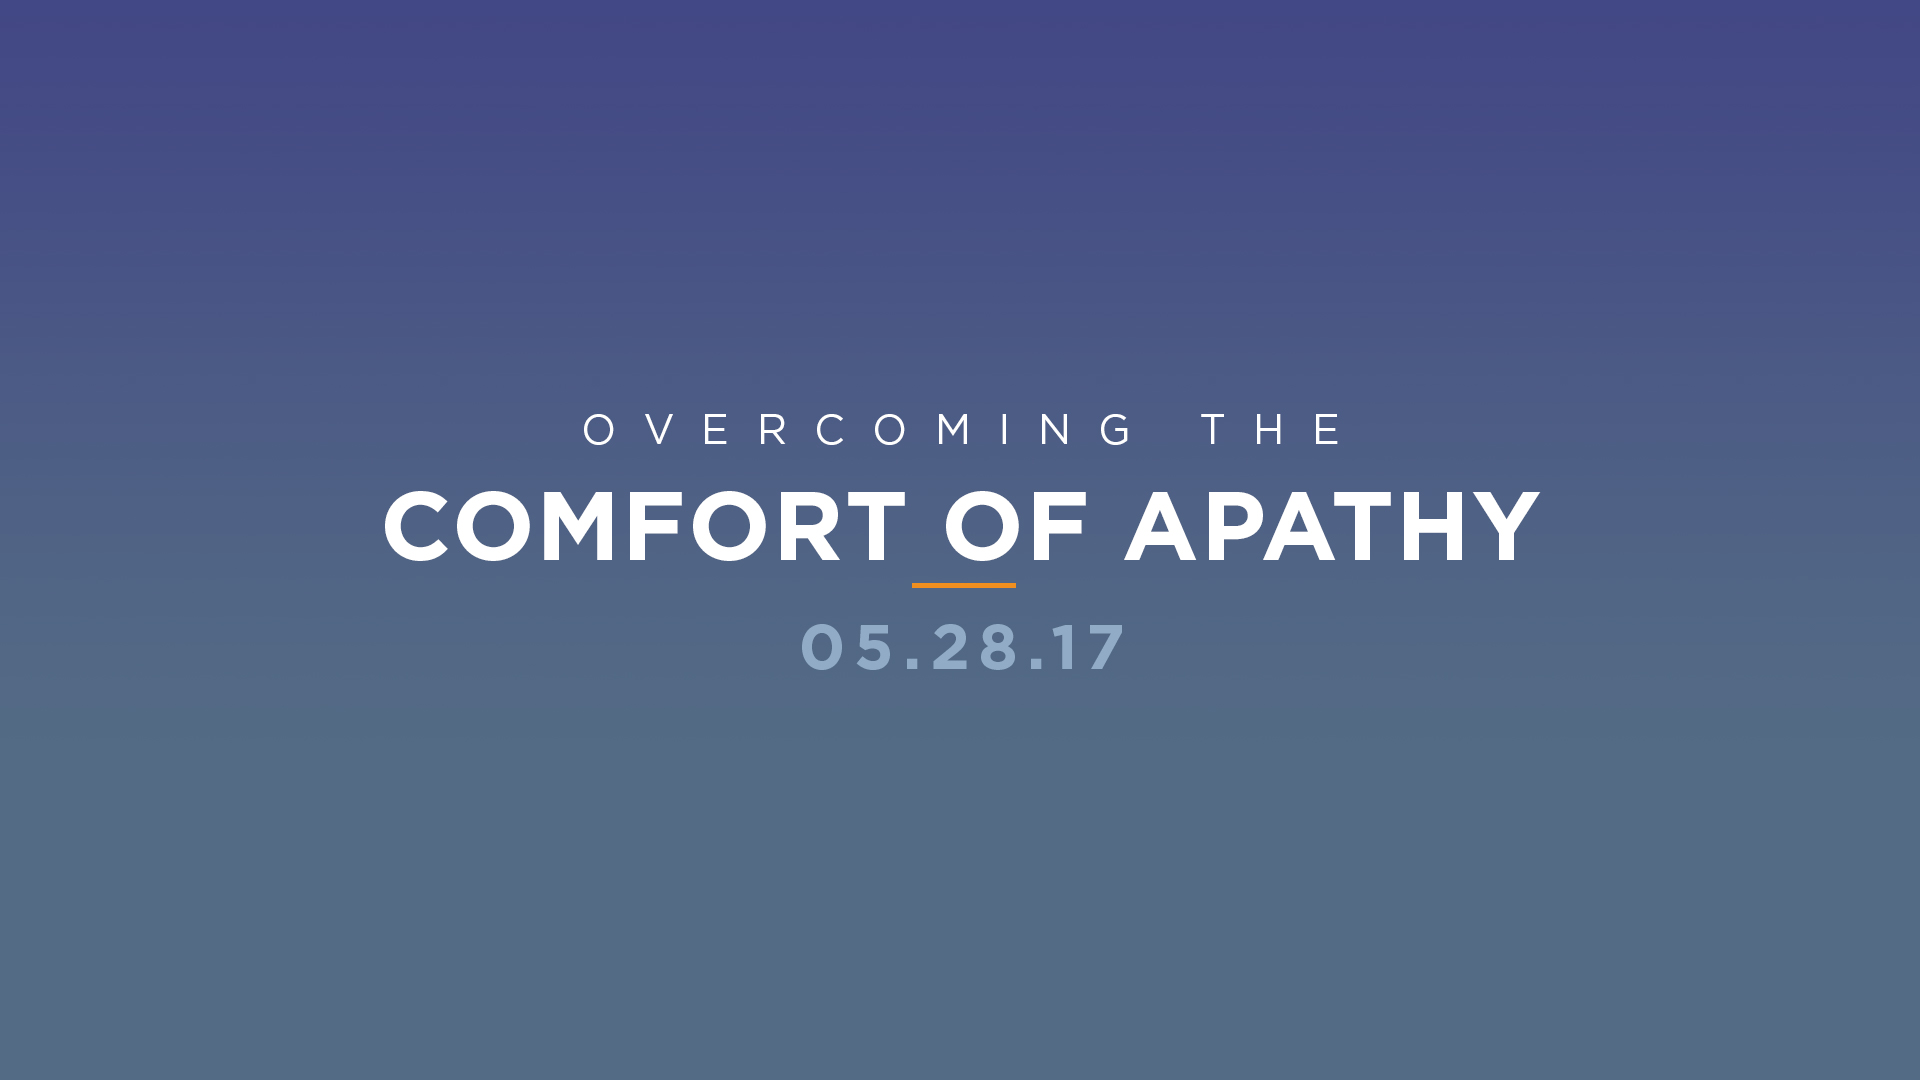 Overcoming the Comfort of Apathy